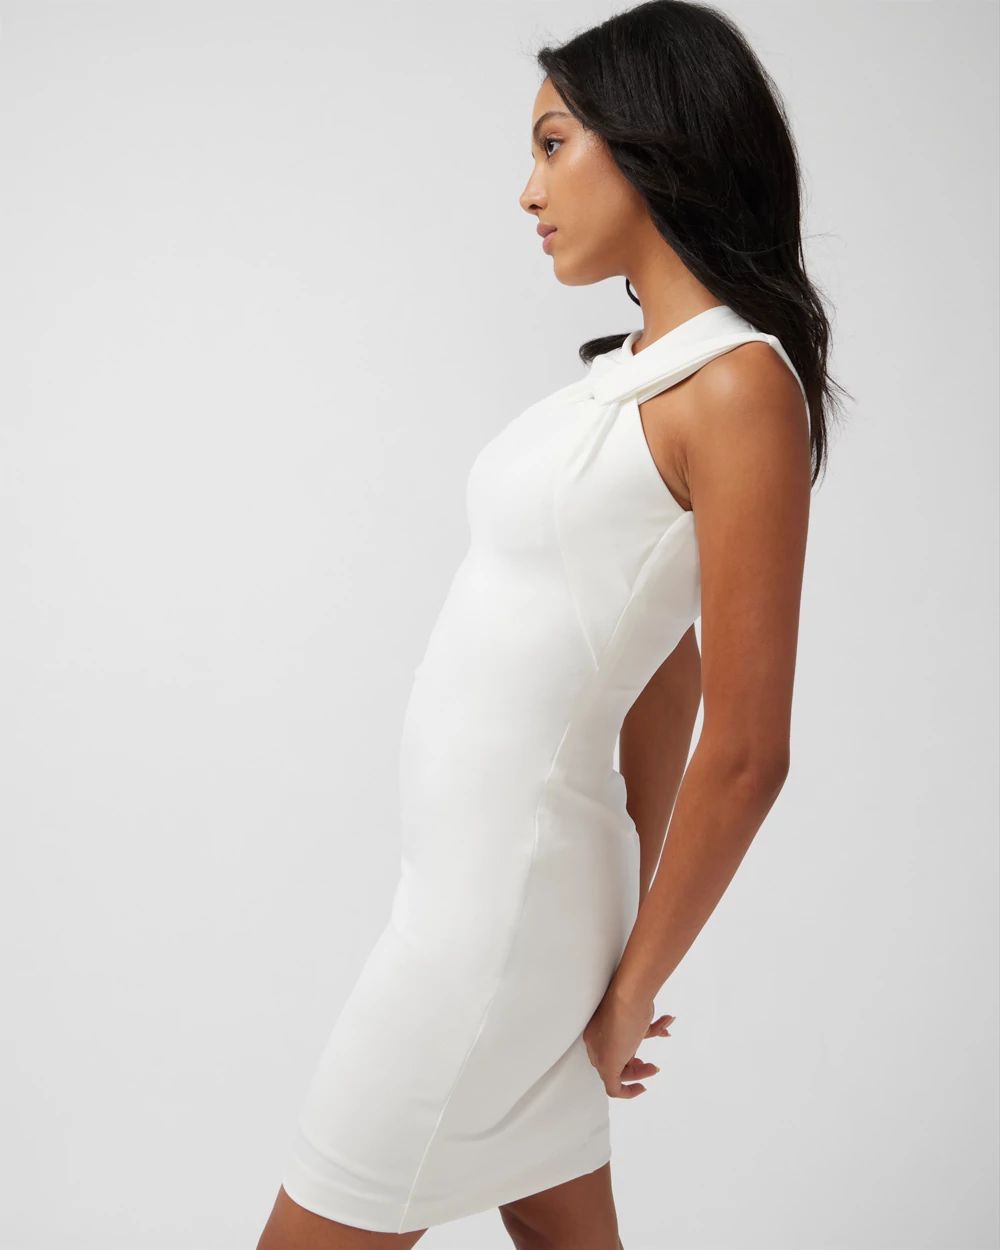 Asymmetrical Neck White Dress click to view larger image.